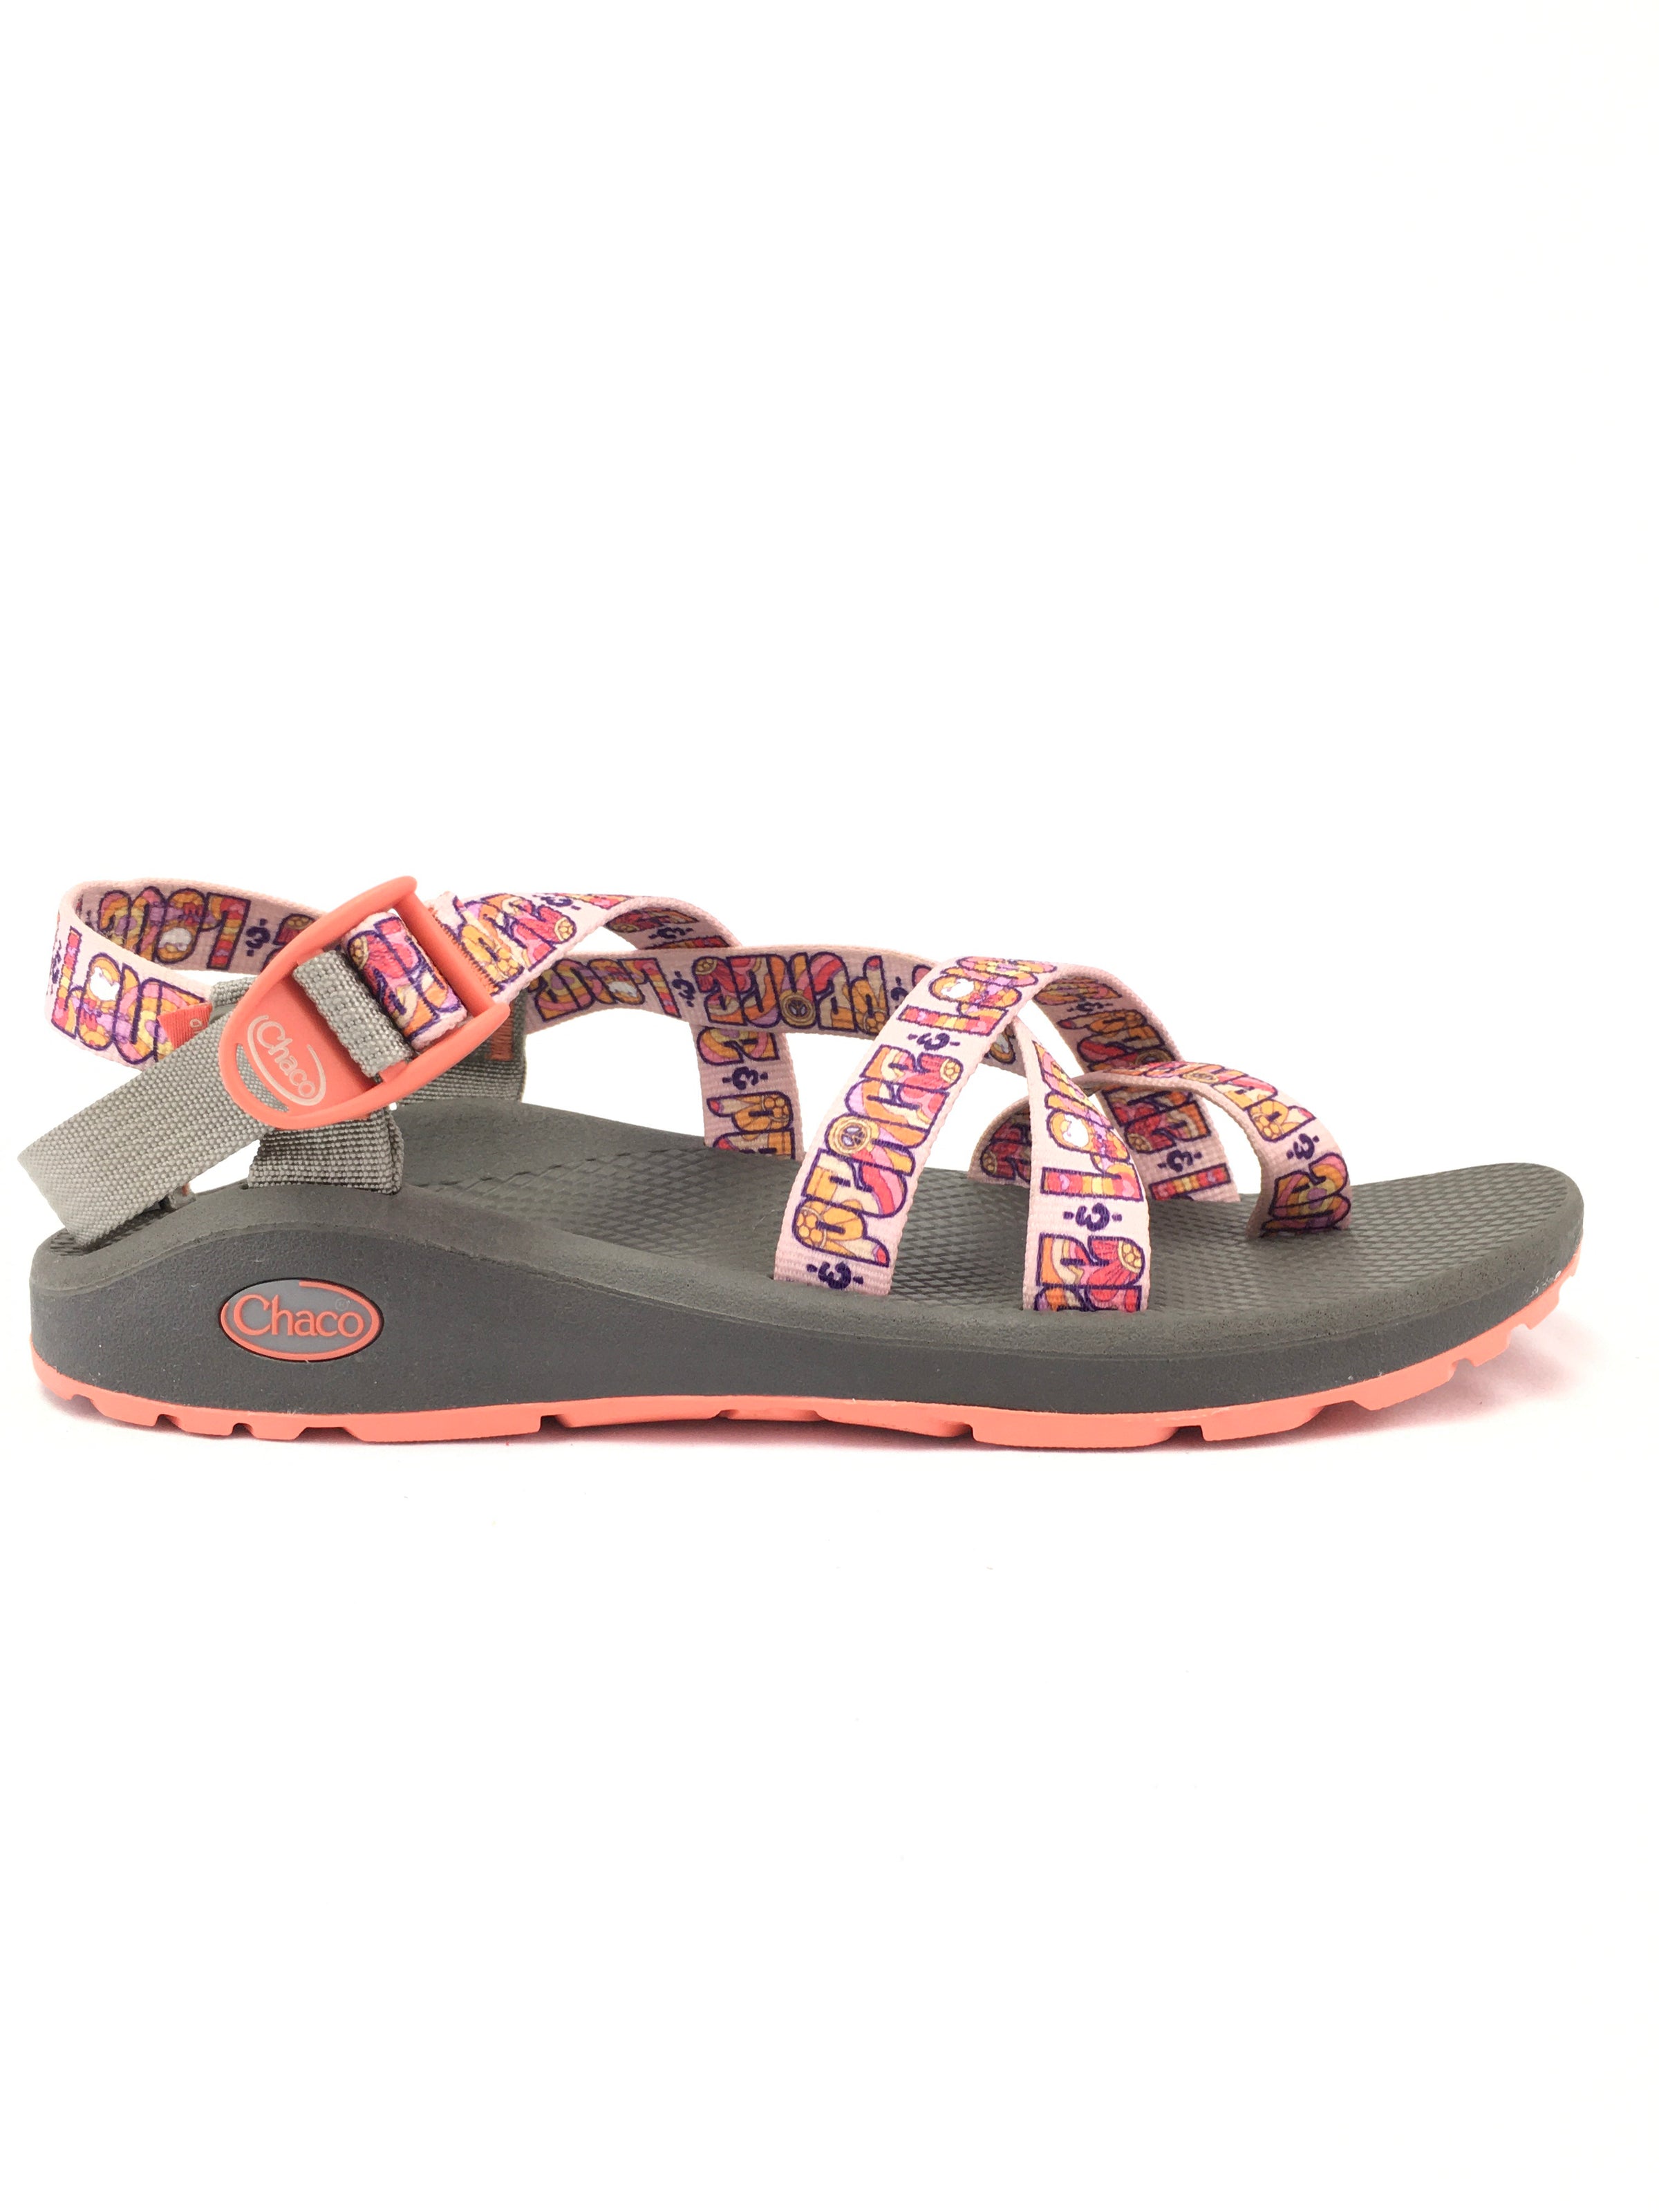 Chaco Sandals Women’s Size 10